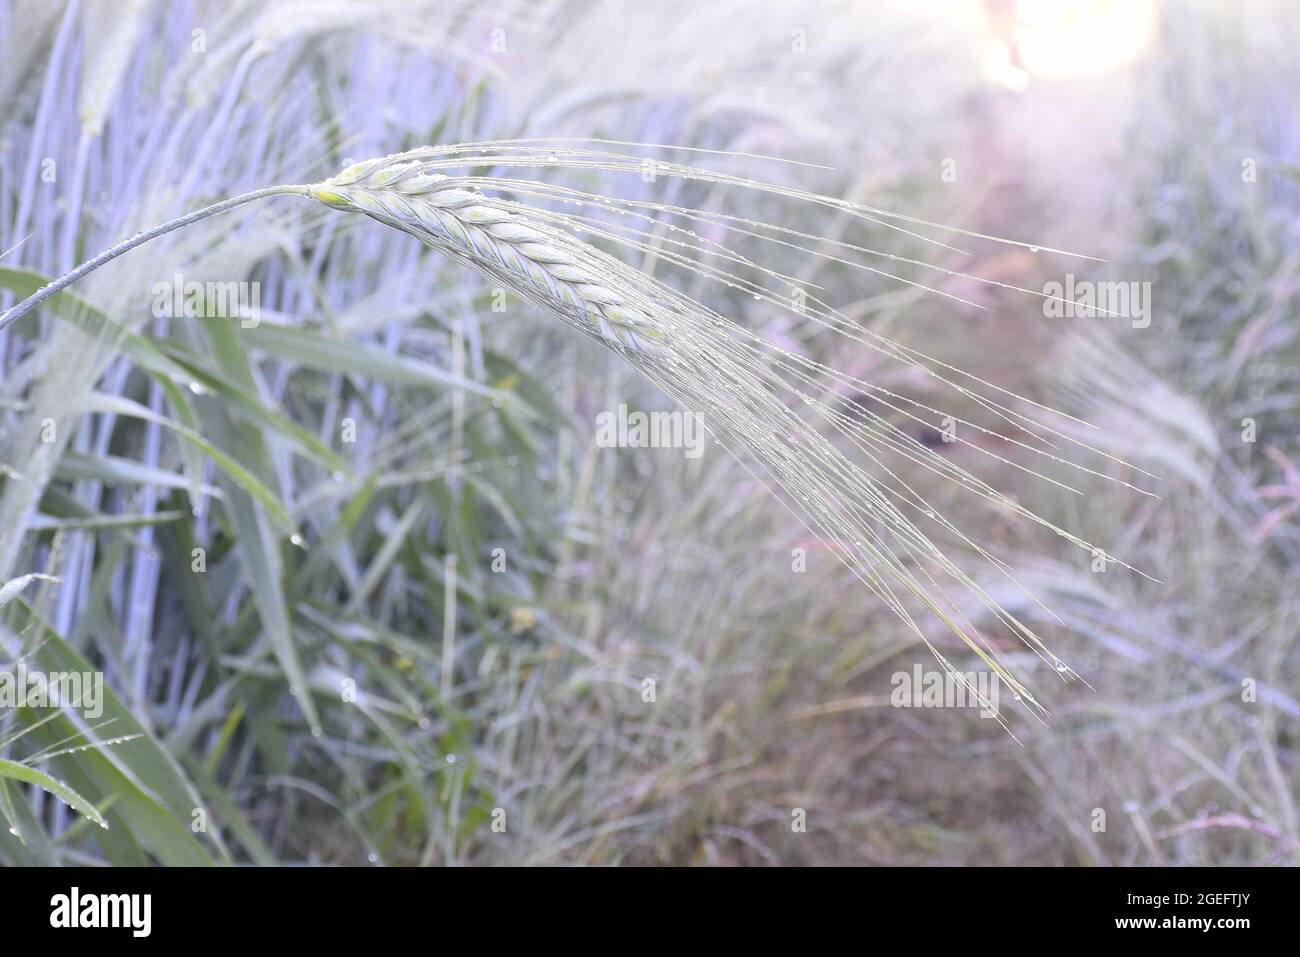 Wheat earrings are shining with the rays of the sun. The sun scattering over the wheat plants, Stock Photo